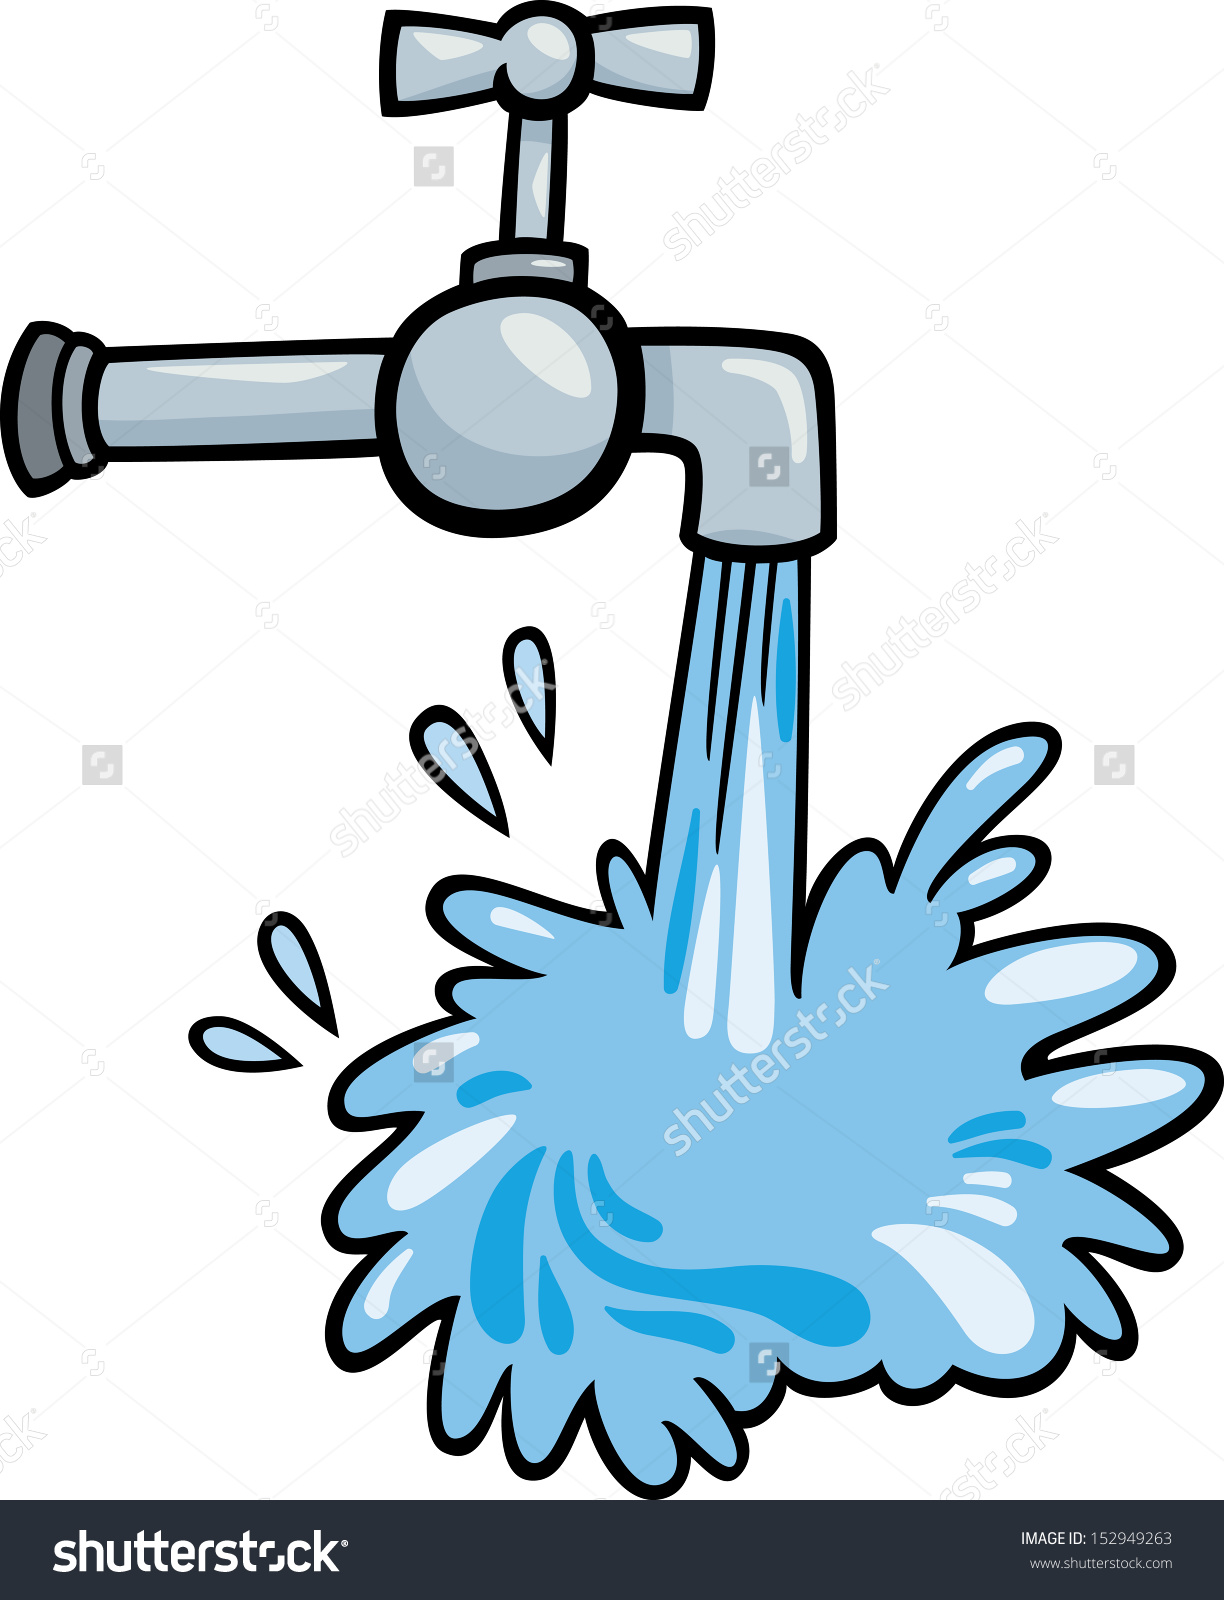 running water tap clipart 10 | Clipart Station